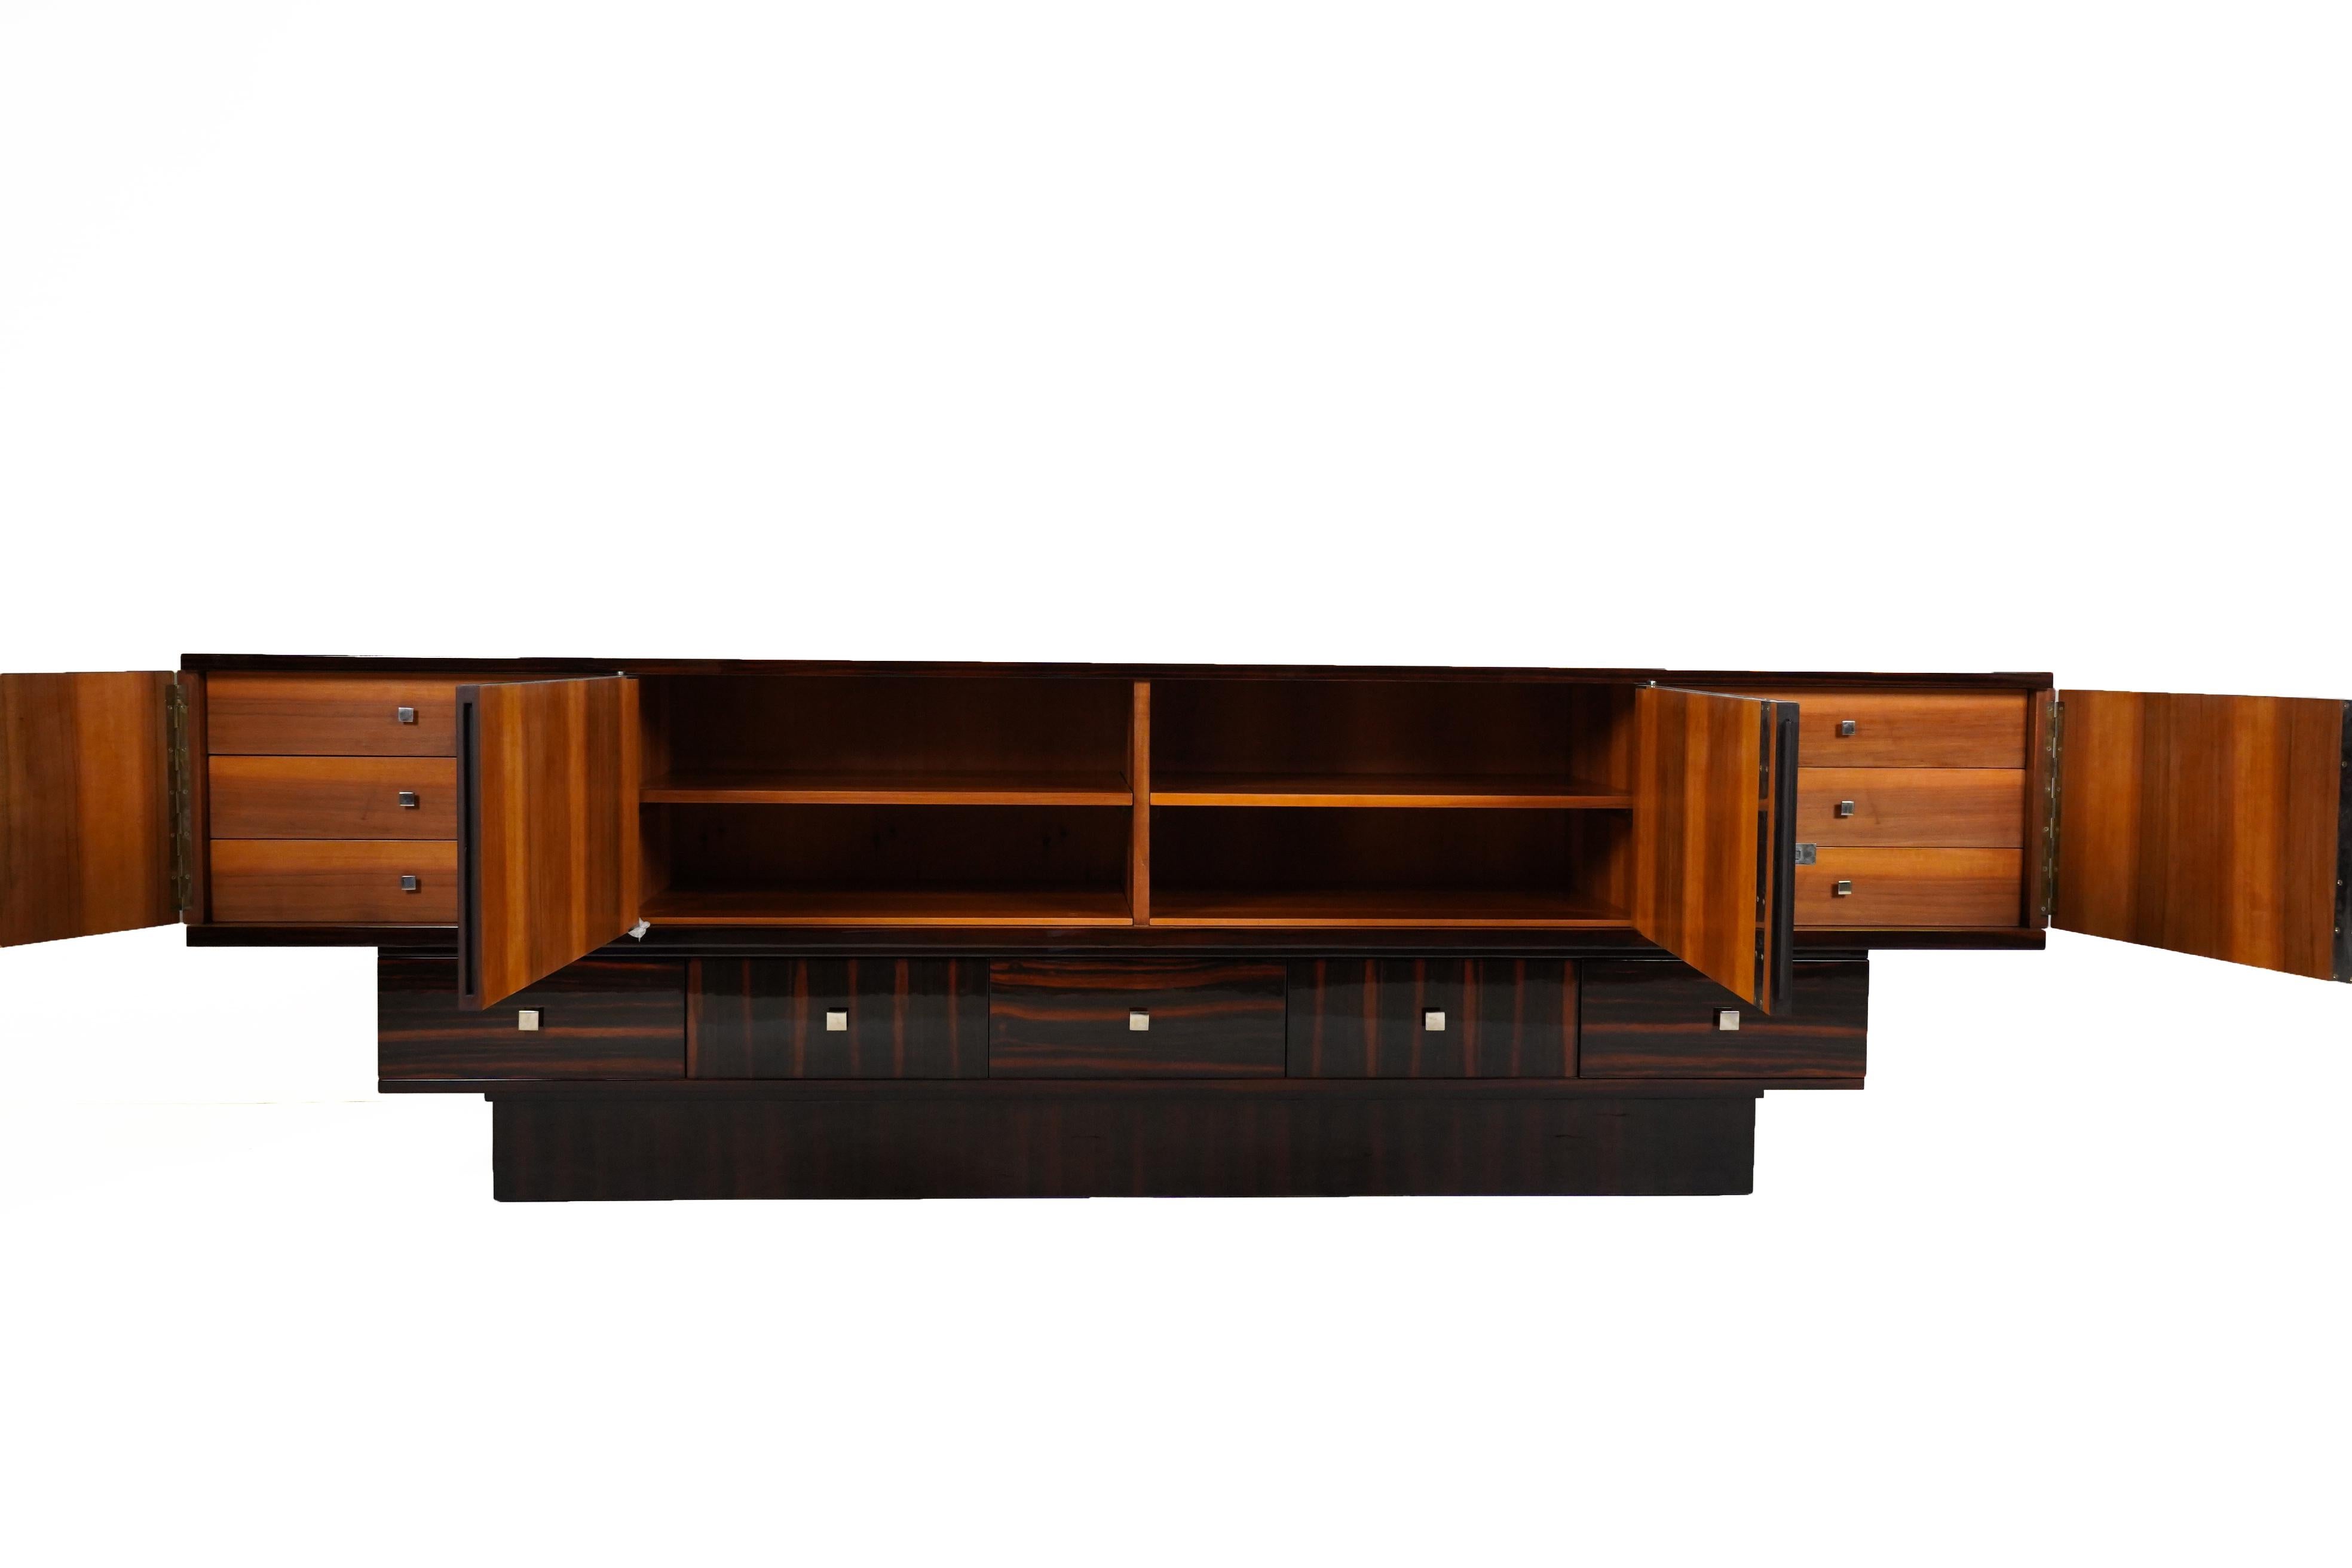 Hungarian Art Deco Style Sideboard in Makassar Wood with Four Doors